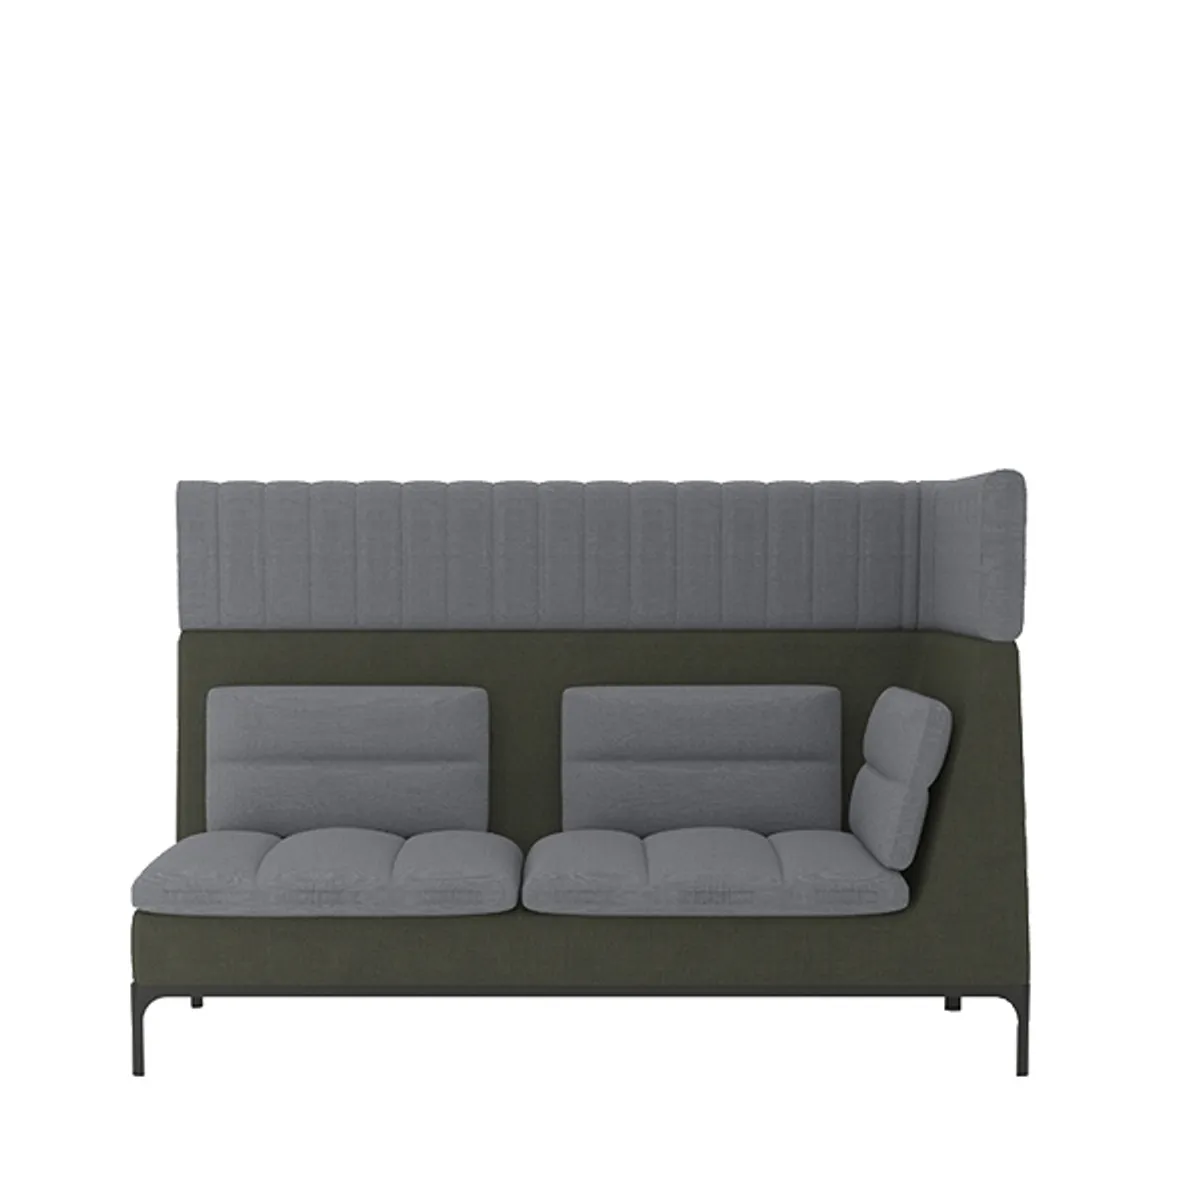 Haven high back modular corner sofa Inside Out Contracts2